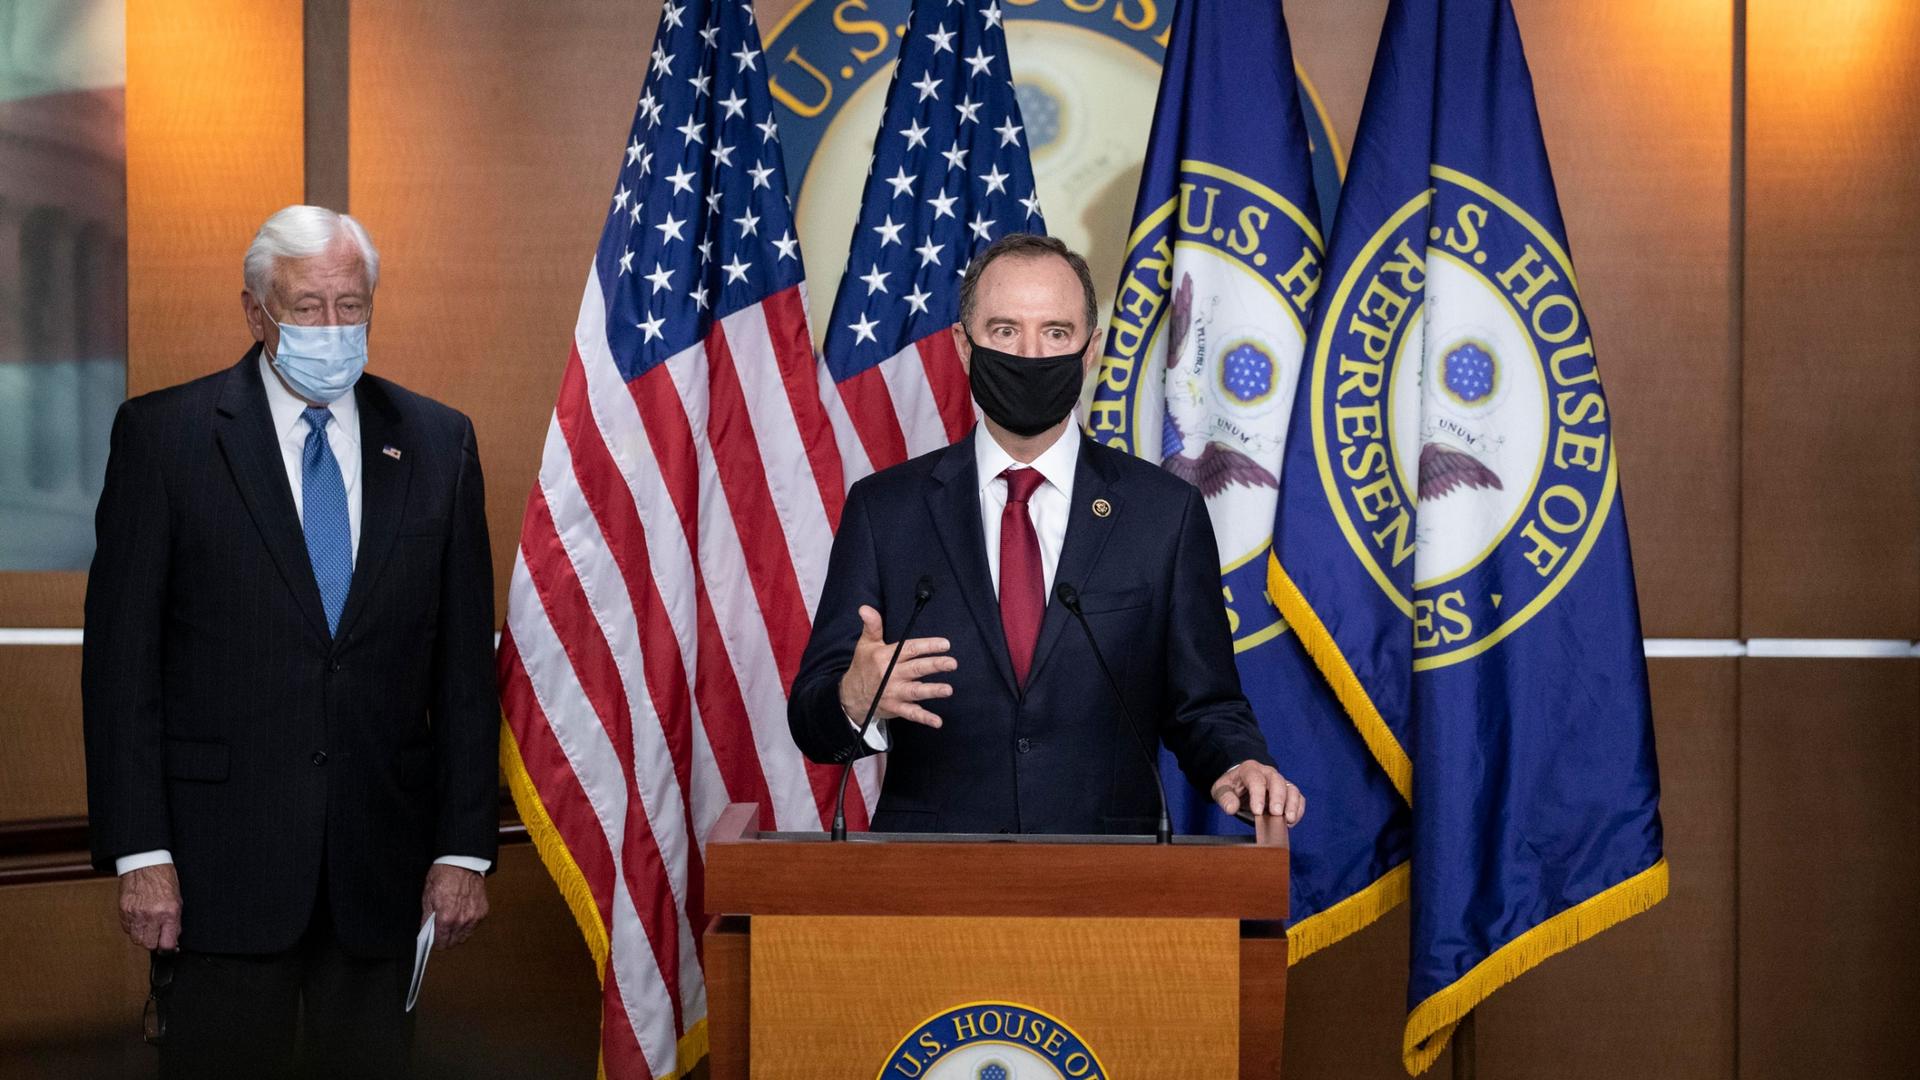 Rep. Adam Schiff is shown wearing a black face mask and standing at a wooden podium with flags behind him.